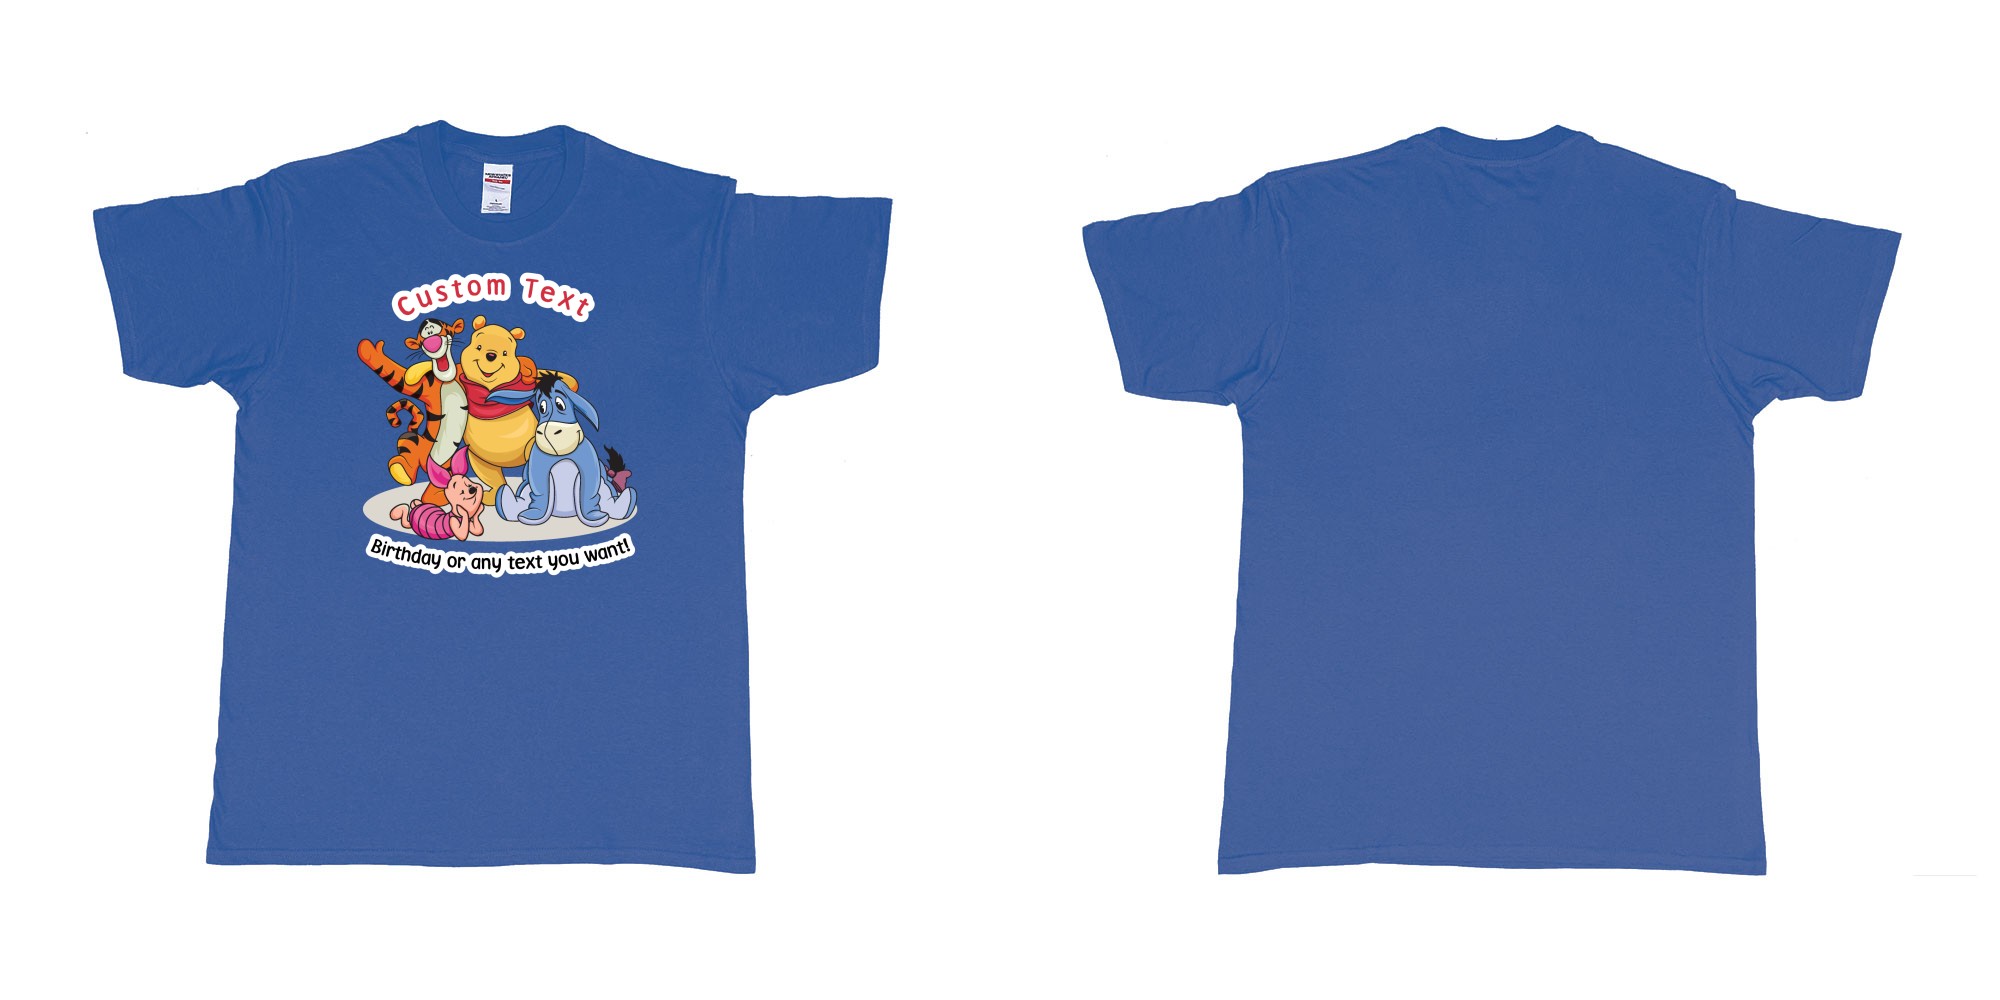 Custom tshirt design winnie the pooh and friend in fabric color royal-blue choice your own text made in Bali by The Pirate Way